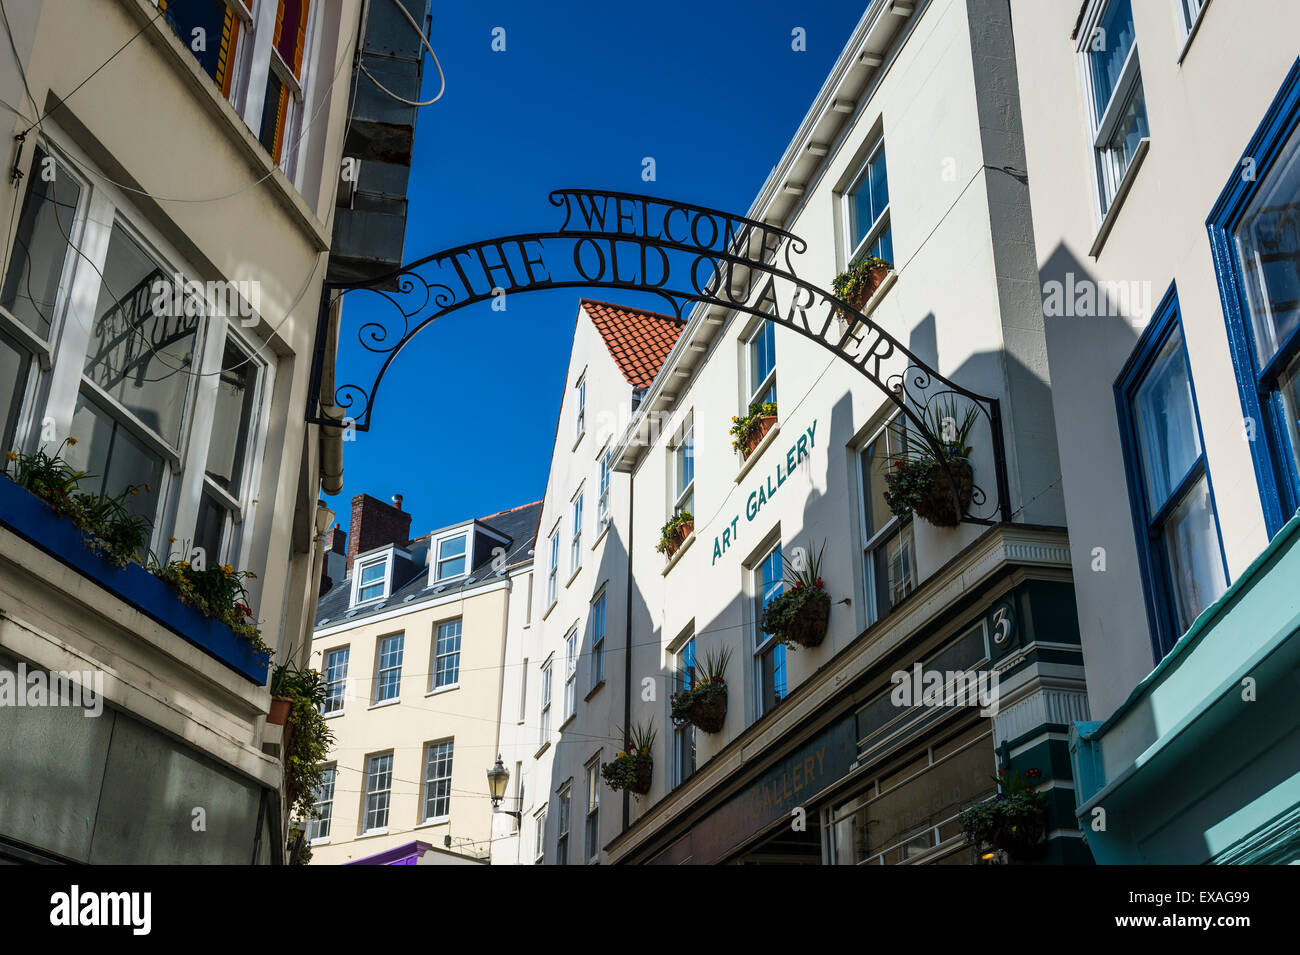 The old town of Saint Peter Port, Guernsey, Channel Islands, United Kingdom, Europe Stock Photo